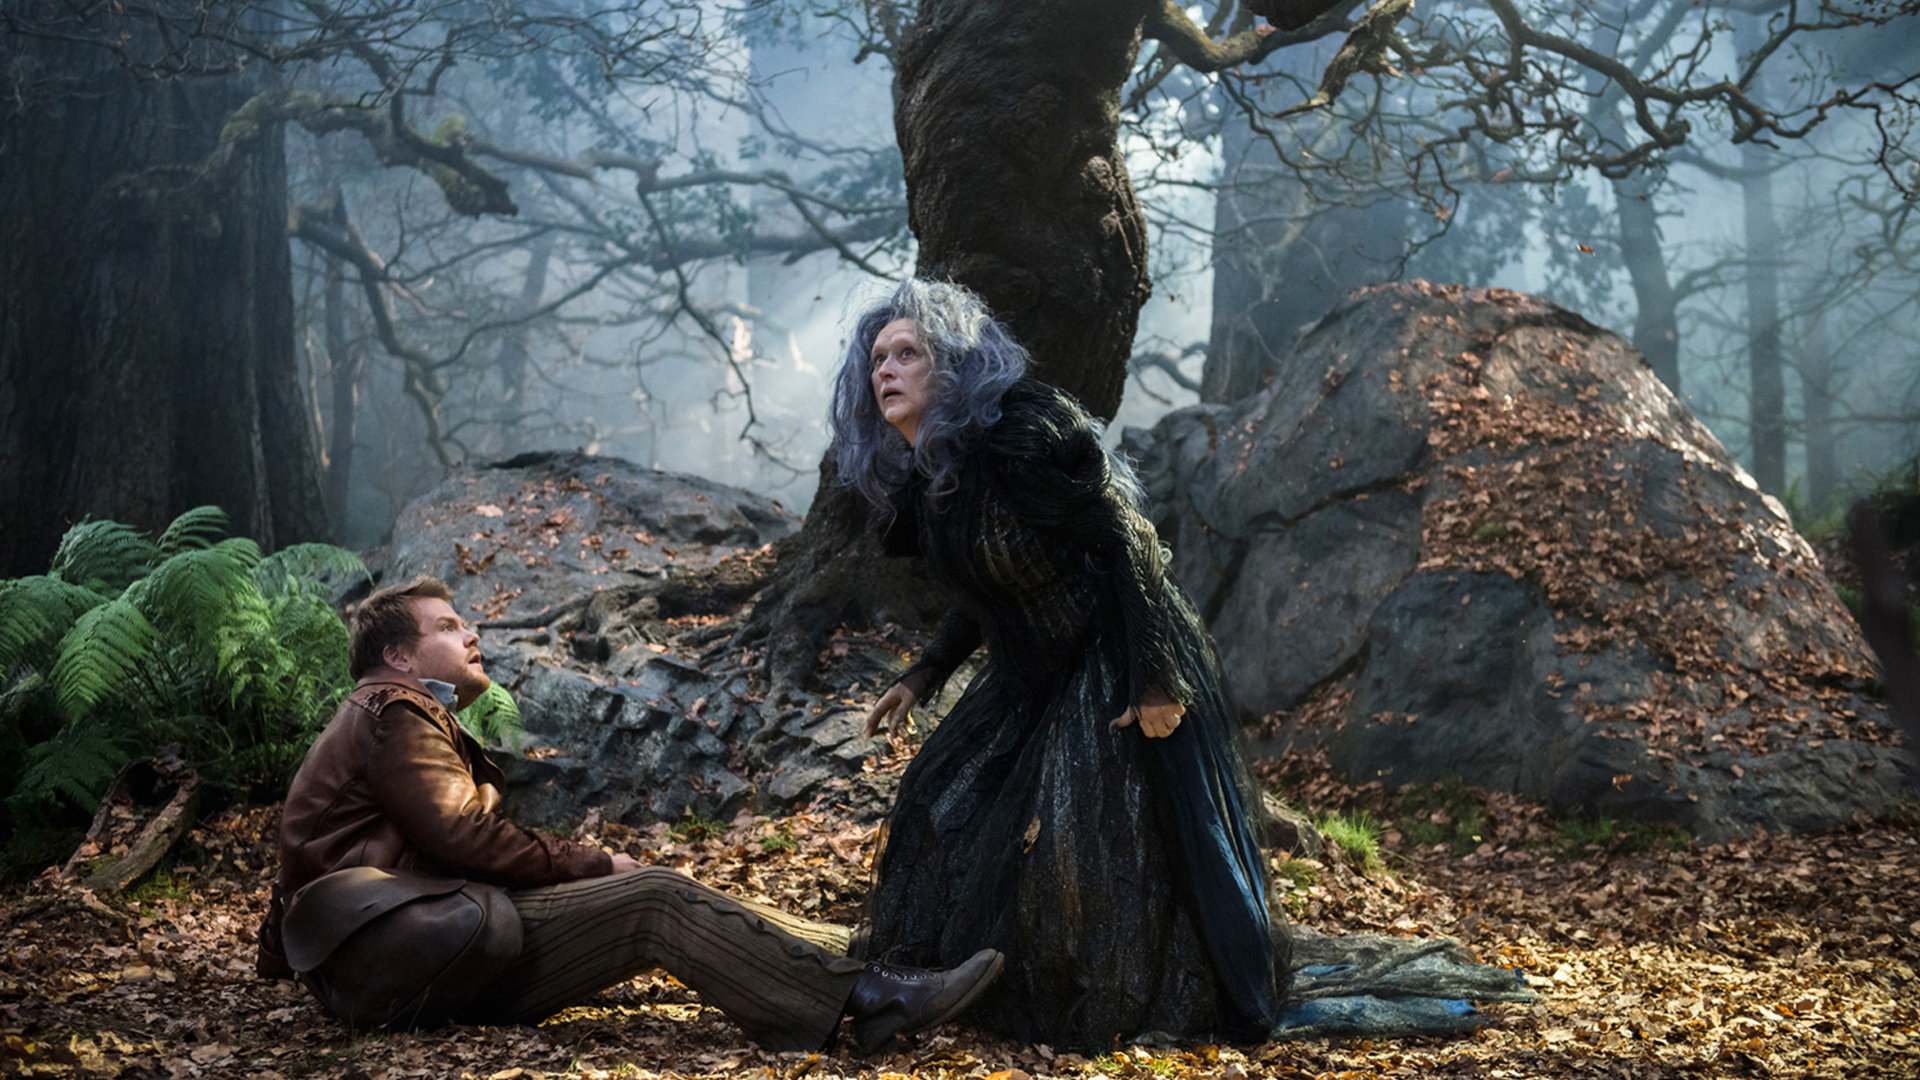 movie, into the woods (2014)